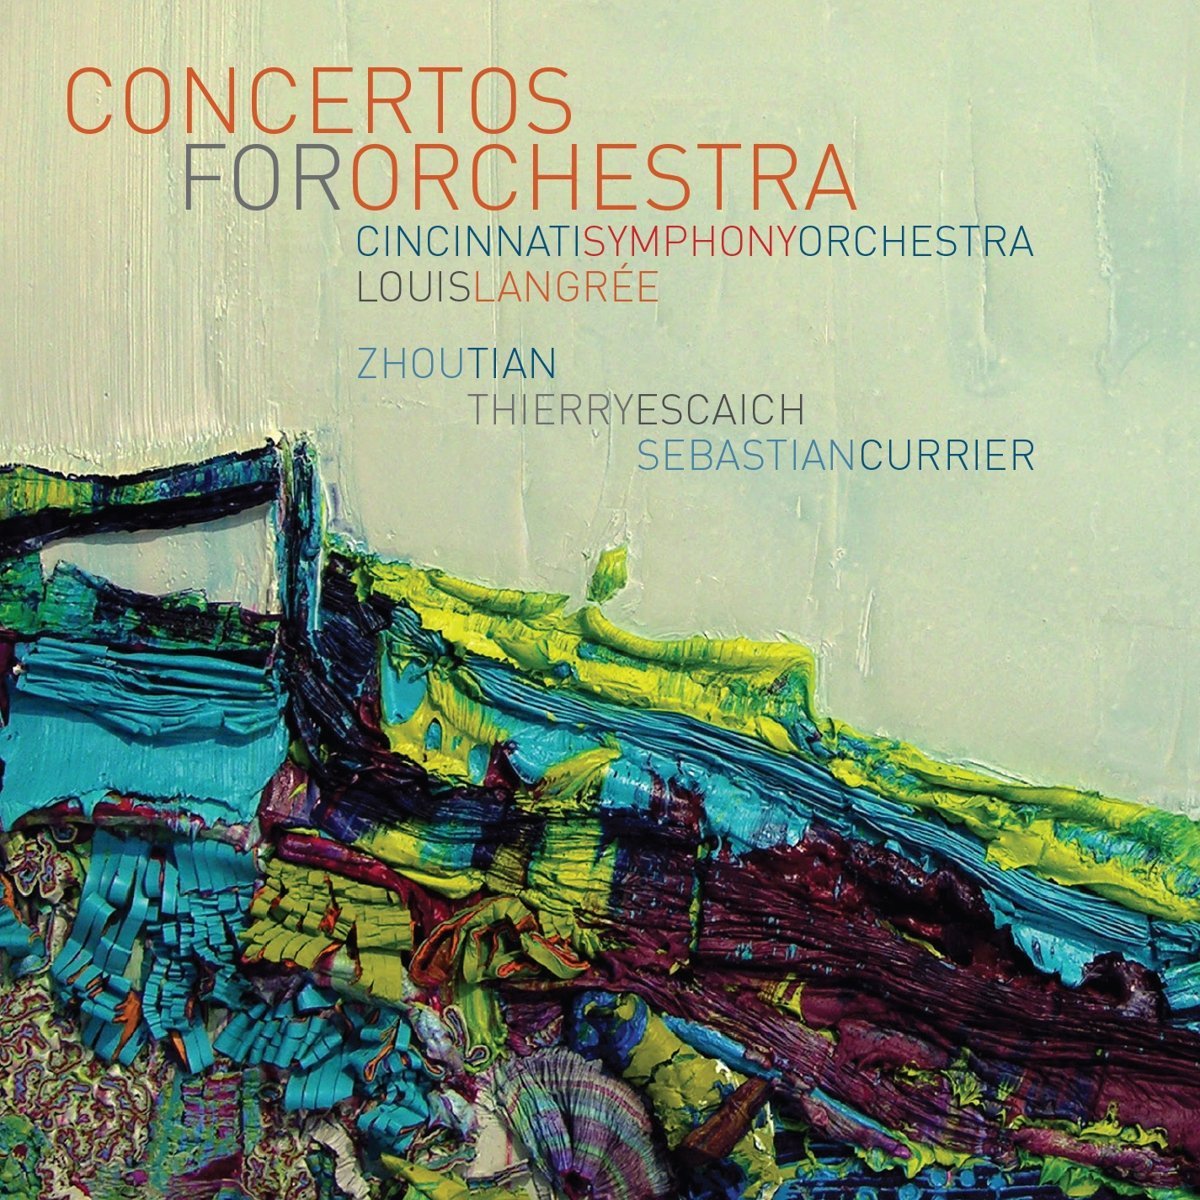 Concertos for Orchestra – music by Zhou Tian, Thierry Escaich and Sebastian Currier Cincinnati Symphony Orchestra/Louis Langrée